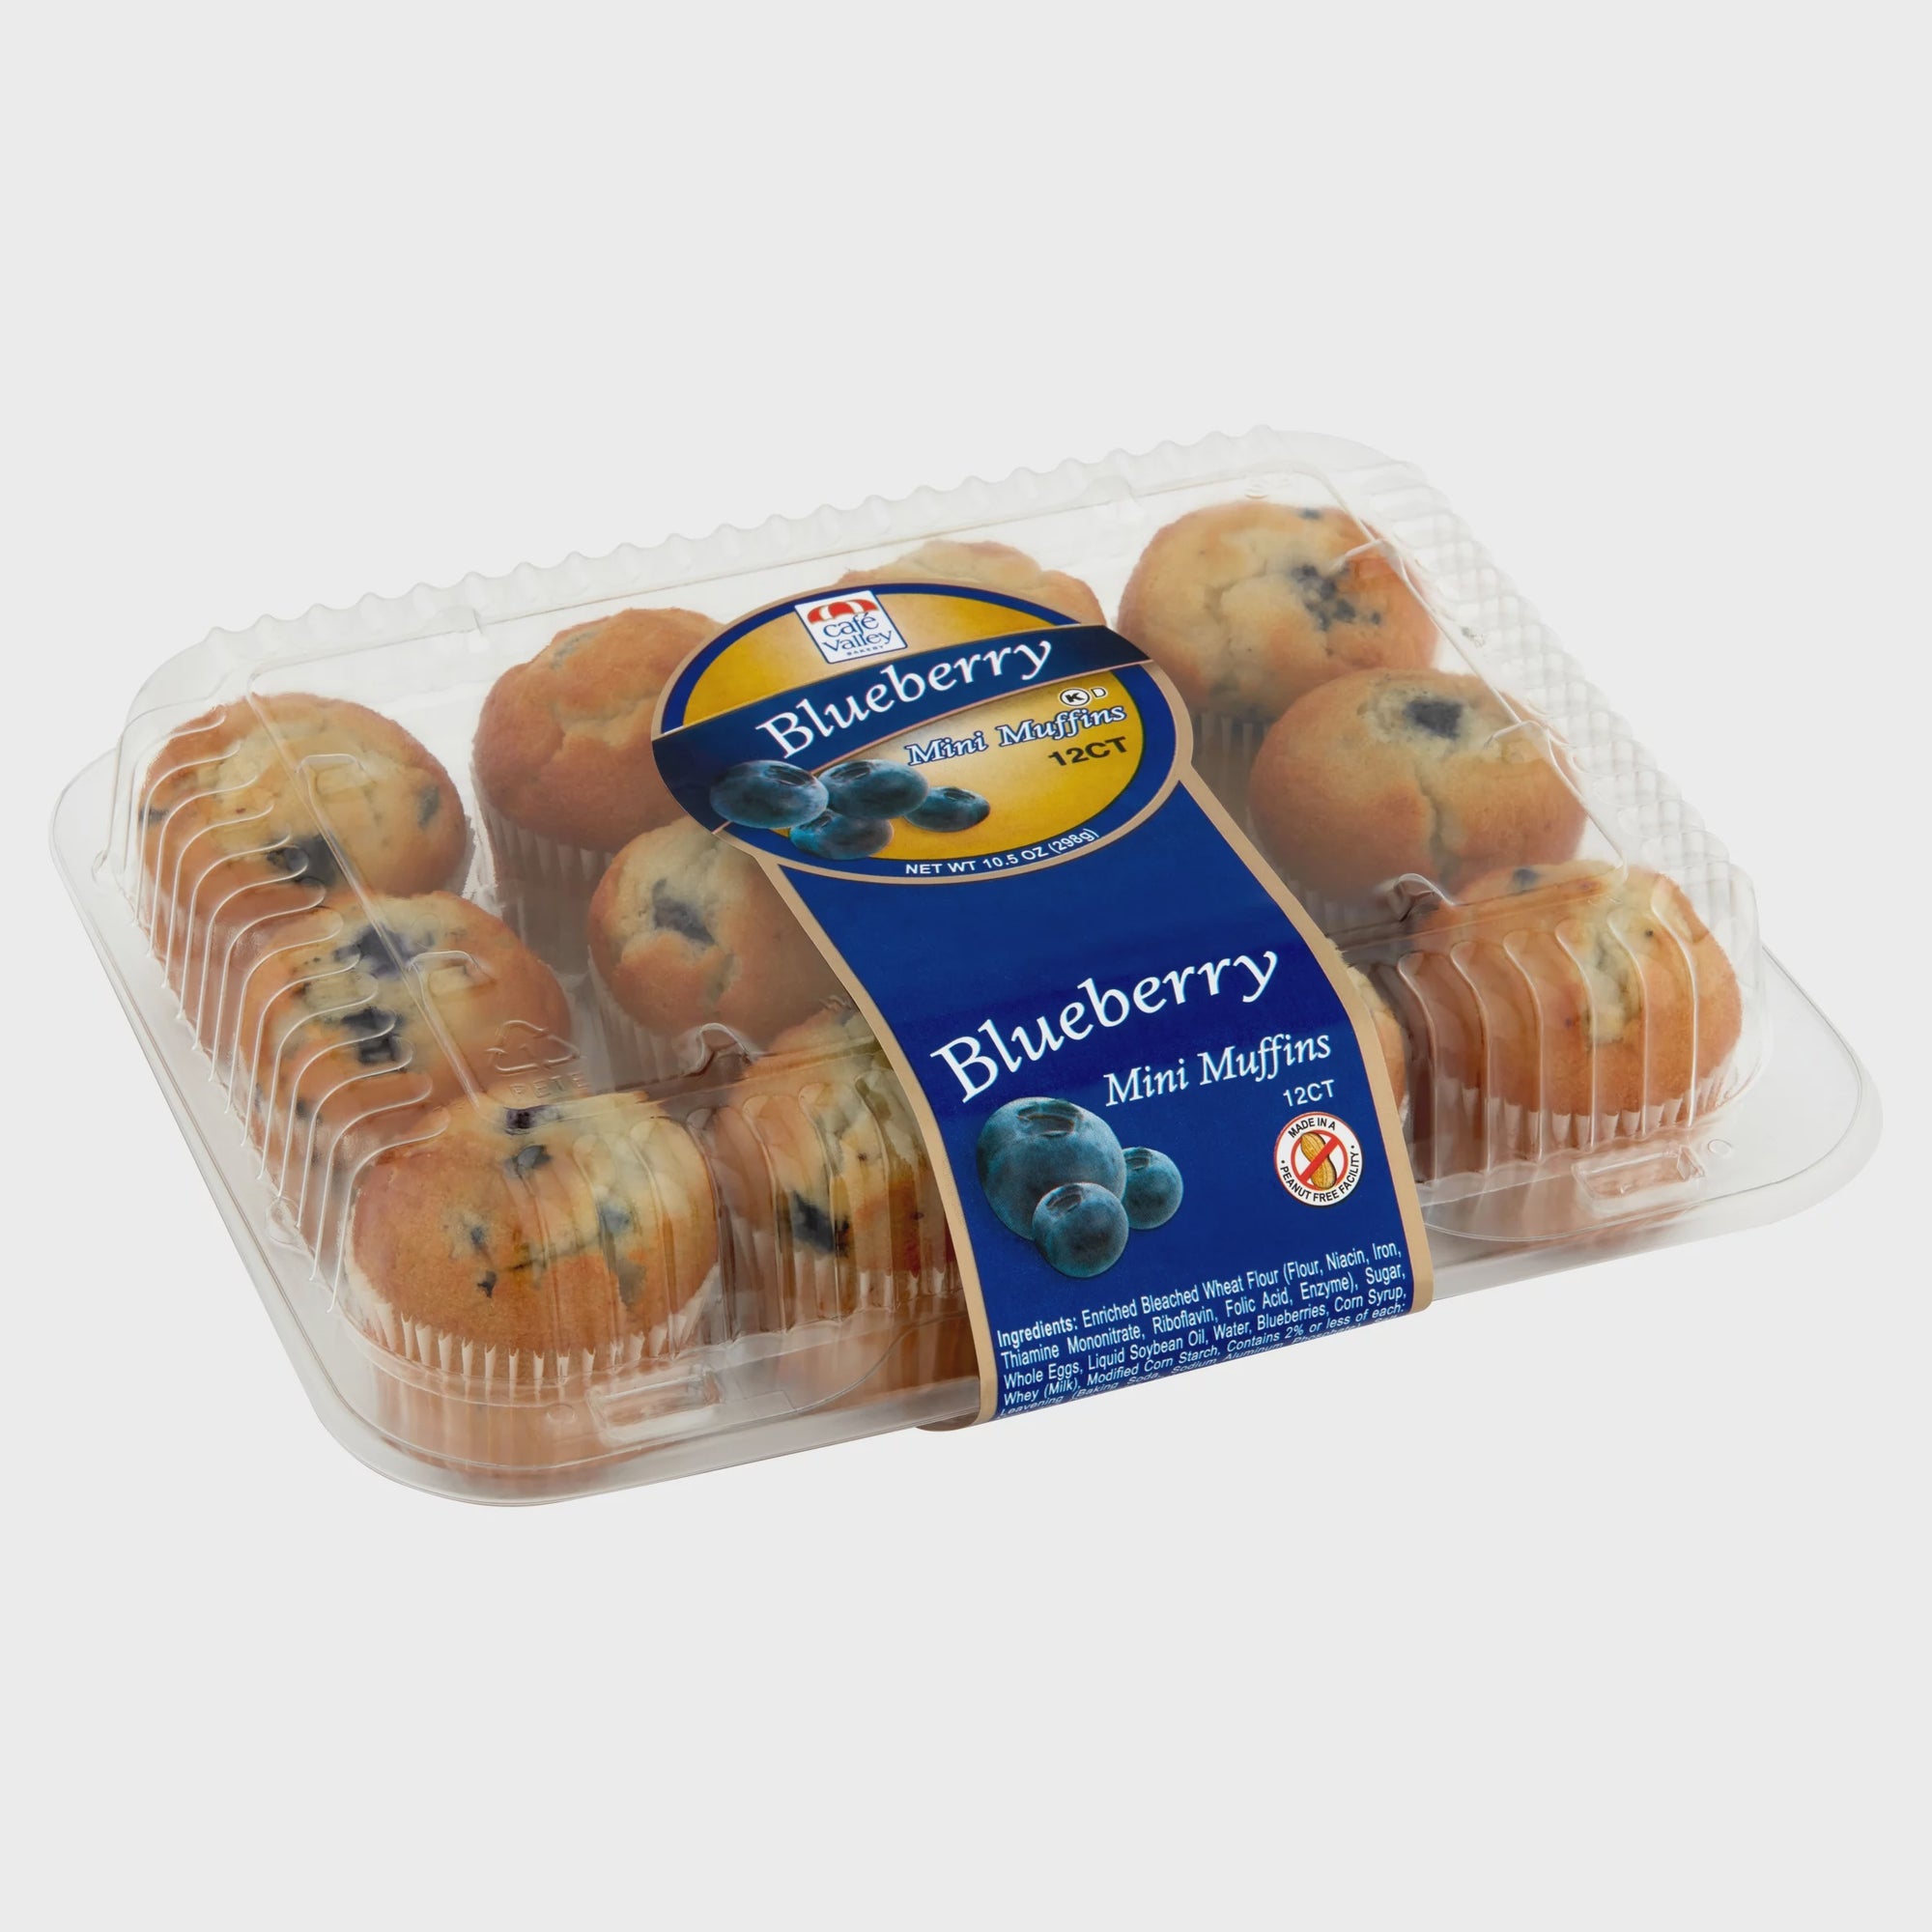 Cafe Valley Mini Blueberry Muffin 10oz